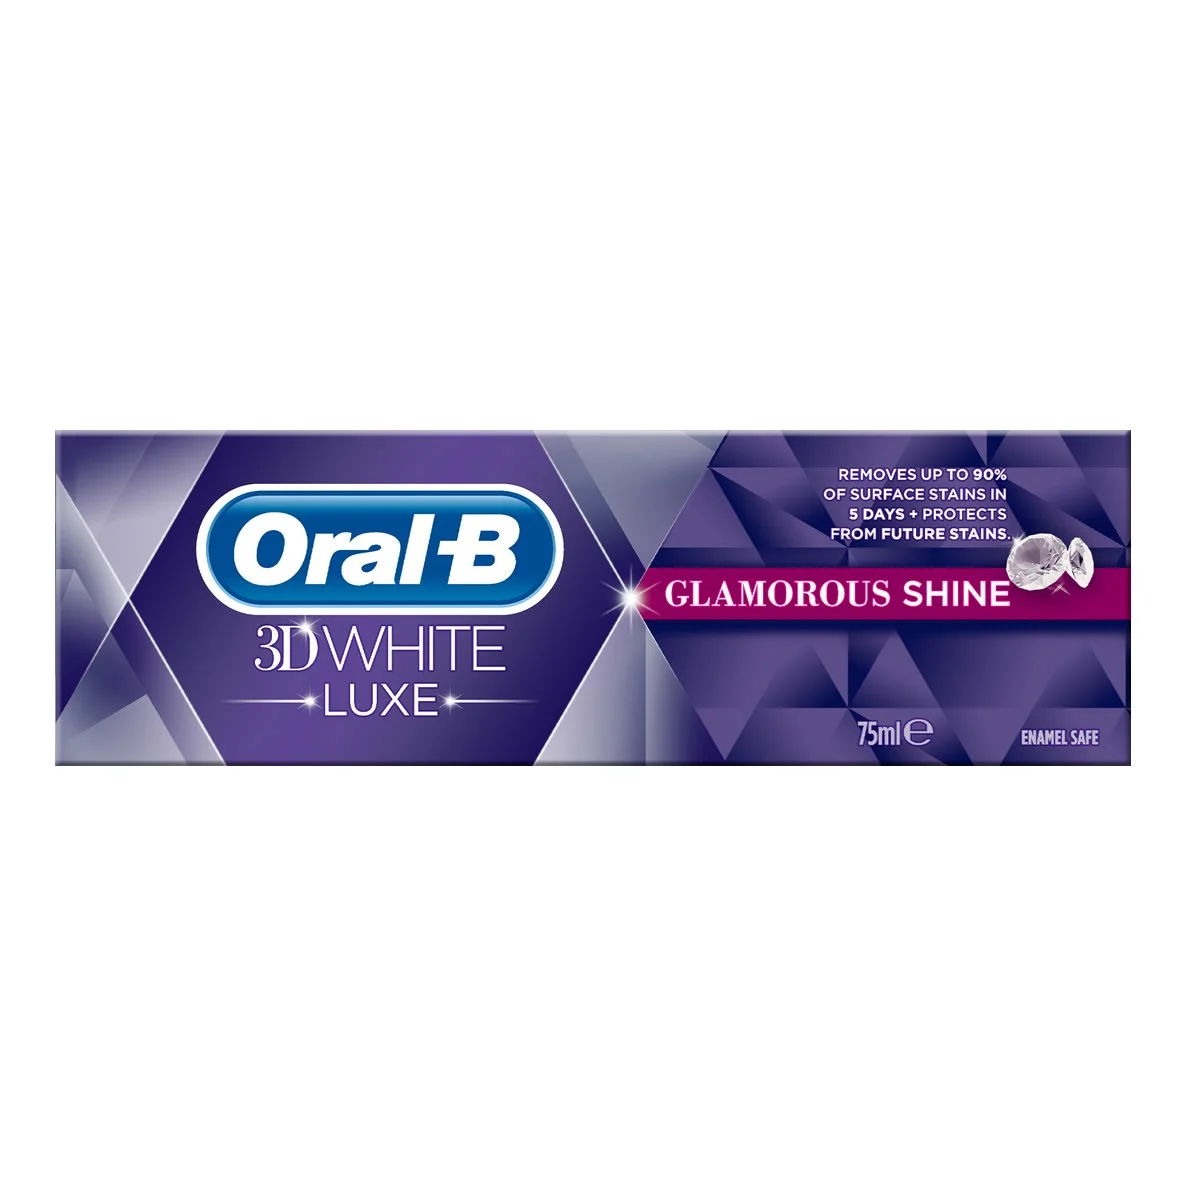 Oral-B 3D White Luxe Glamourous Shine tandpasta undefined